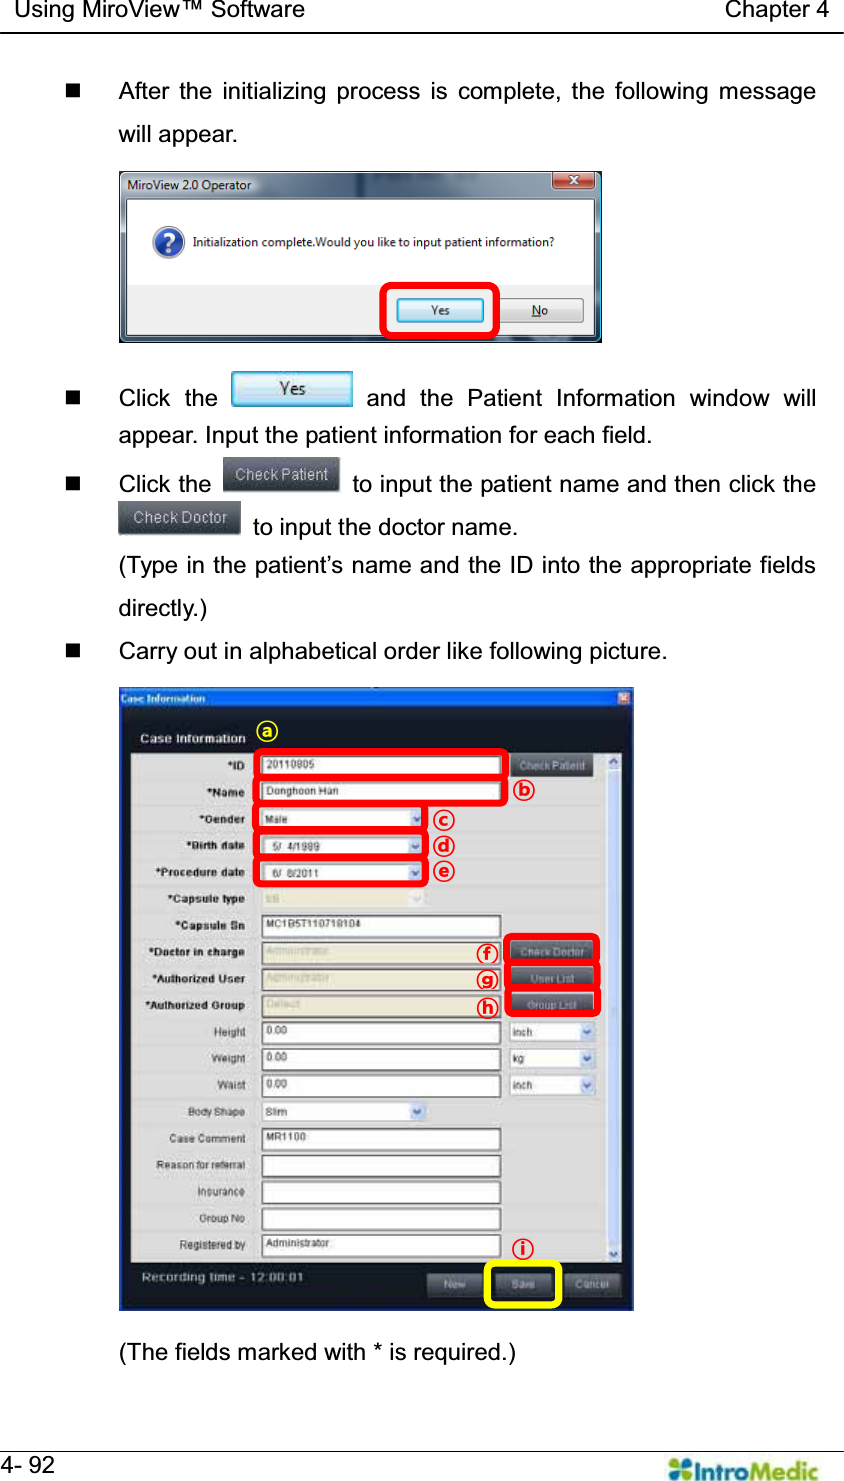   Using MiroView Software                                   Chapter 4   4- 92   After the initializing process is complete, the following message will appear.   Click the   and the Patient Information window will appear. Input the patient information for each field.   Click the    to input the patient name and then click the   to input the doctor name. 7\SHLQWKHSDWLHQW¶VQDPHDQGWKH,&apos;LQWRWKHDSSURSULDWHILHOGVdirectly.)   Carry out in alphabetical order like following picture.  (The fields marked with * is required.) ß à á Ú Û ÜÝ Þ â 